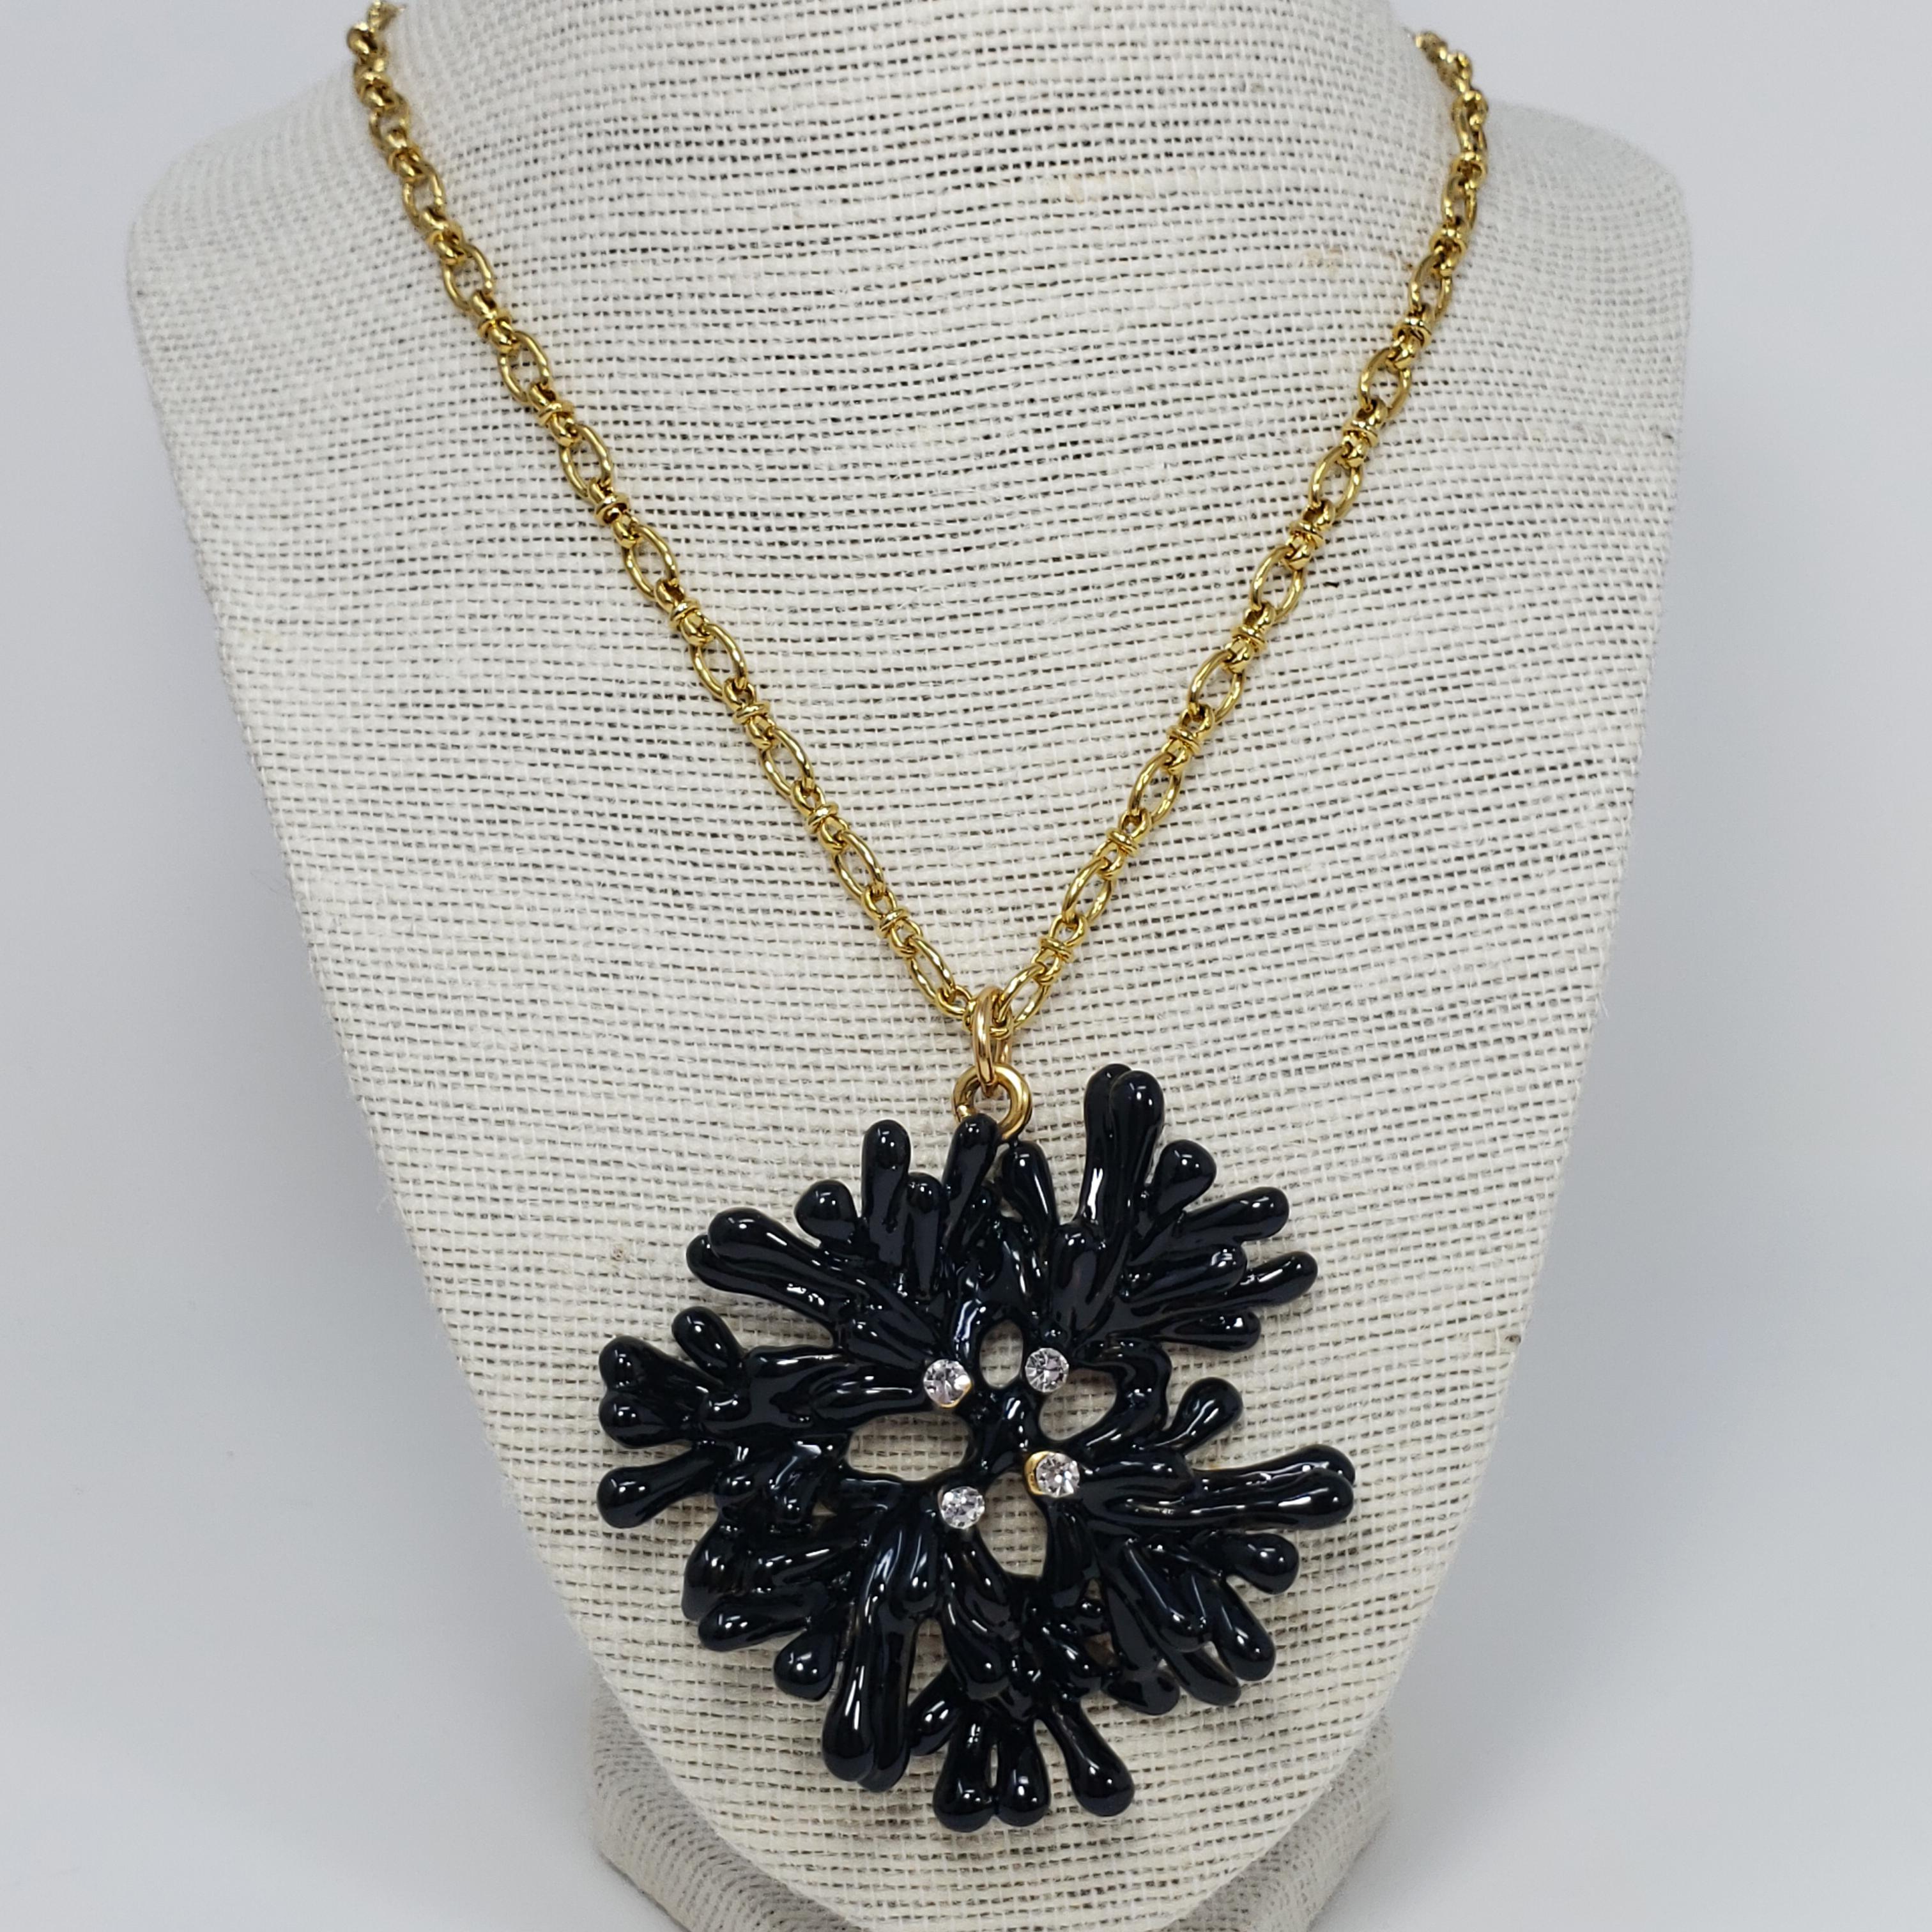 A stylish Oscar de la Renta pendant necklace. Features a black faux coral motif decorated with clear crystals on a gold-plated chain.

Hallmarks: Oscar de la Renta, Made in USA